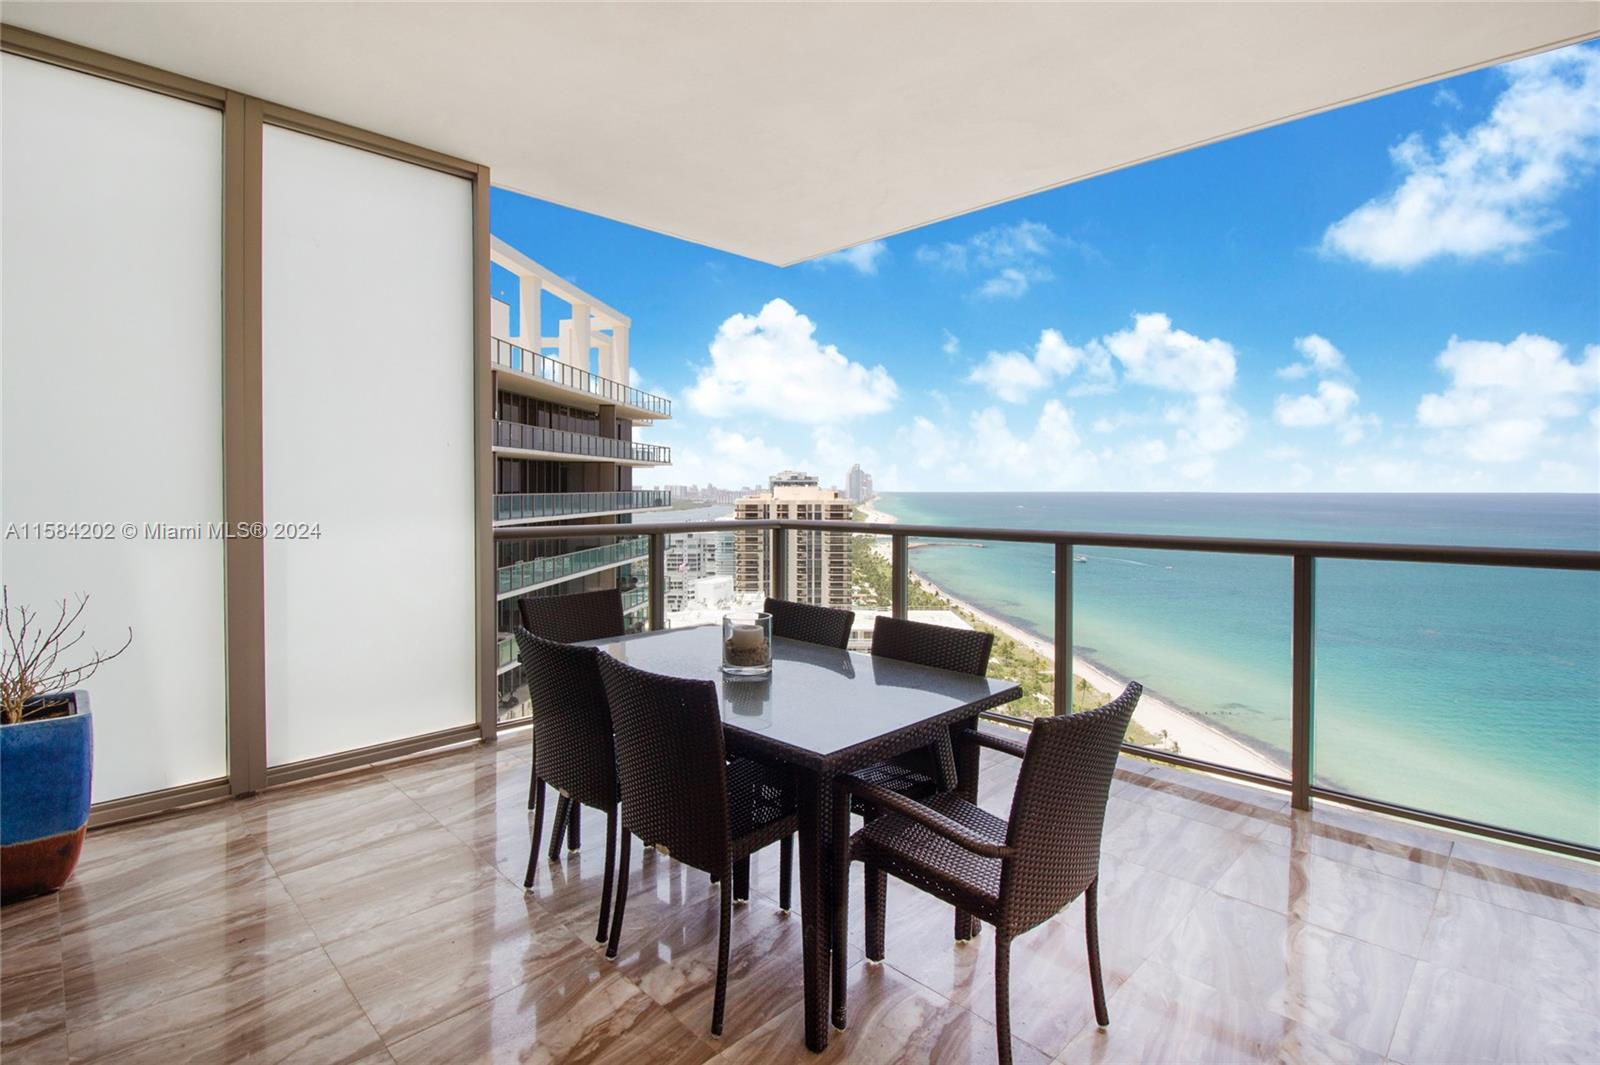 ABSOLUTELY GORGEOUS 2 BED, 2 BATHS AT FAMOUS ST REGIS IN BAL HARBOUR. CONDO IS FULLY FURNISHED. DIRECT AND UNOBSTRUCTED OCEAN VIEWS. COME ENJOY 5 STAR LEAVING WITH A PRIVATE RESIDENCE POOL, IN-ROOM SERVICE AND PERSONAL CHEF UPON REQUEST. ST REGIS IS ACCROSS THE STREET FROM FAMOUS BAL HARBOUR SHOPS FOR WORLD CLASS SHOPPING AND DINING EXPERIENCE.